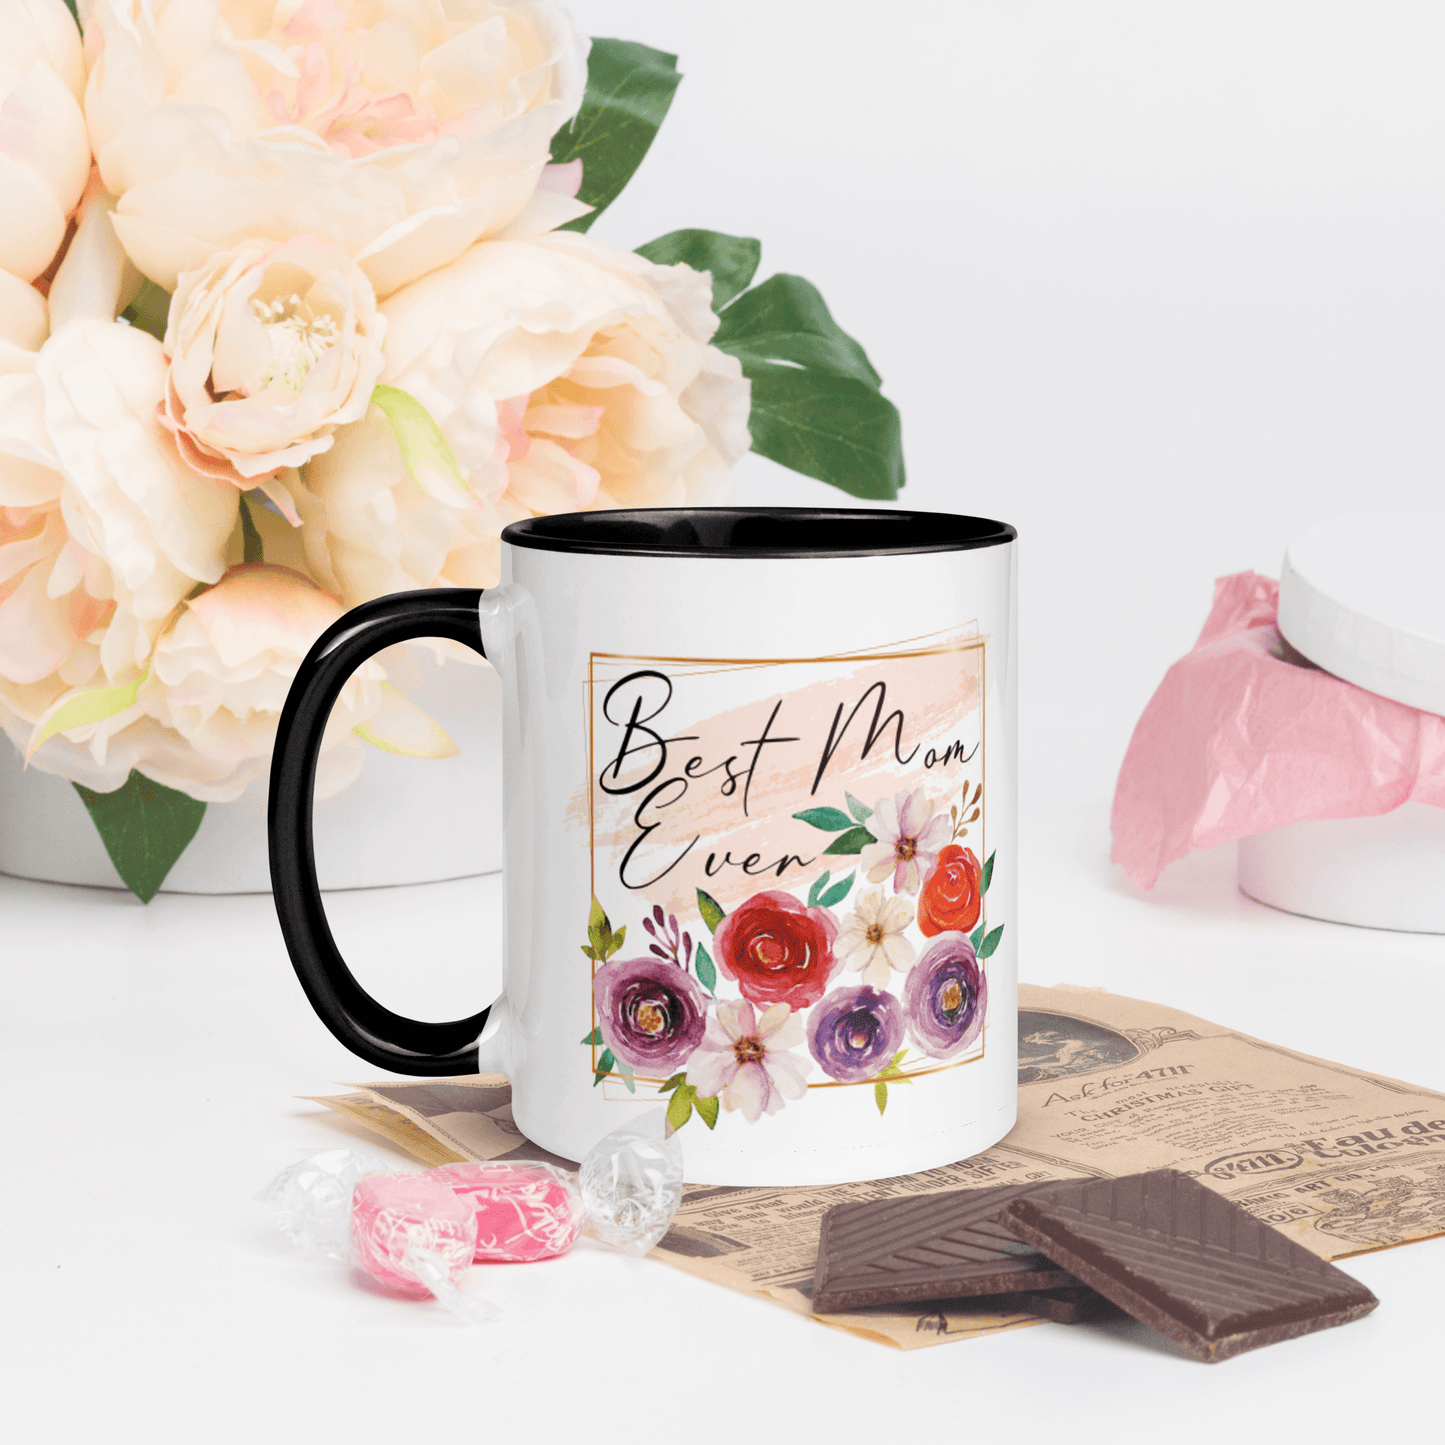 Best Mom Ever! ❤️ Ceramic Mug with Color Accent (Available in Various Colors!) - The Grateful Hearts